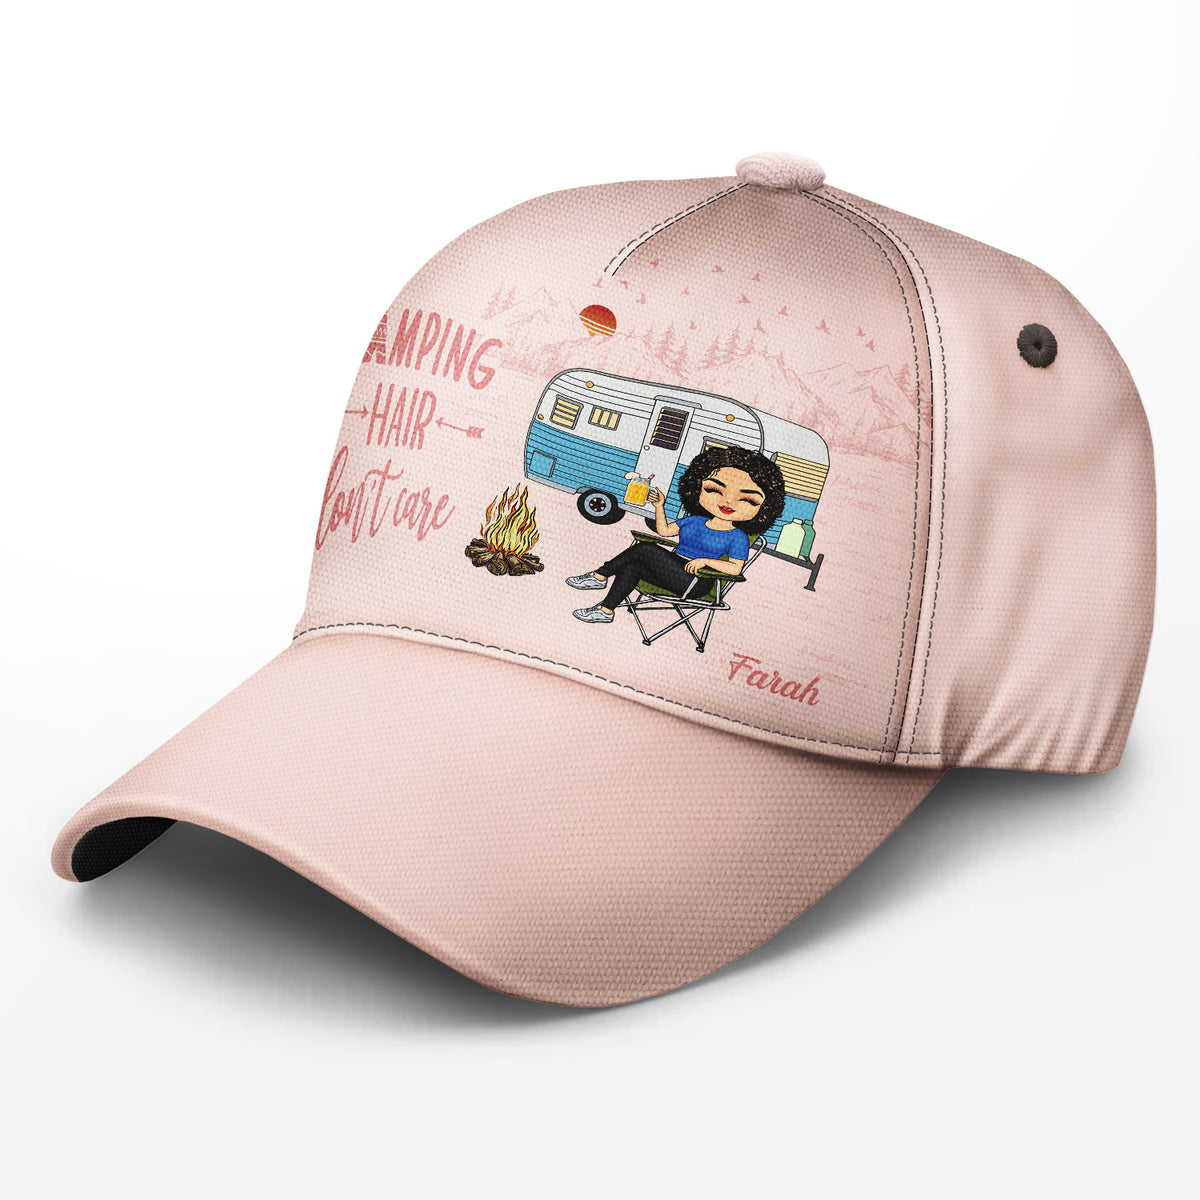 Camping Hair Don't Care - Gift for Camping Lovers, Campers, Women - Personalized Classic Cap Classic Cap / Without Box